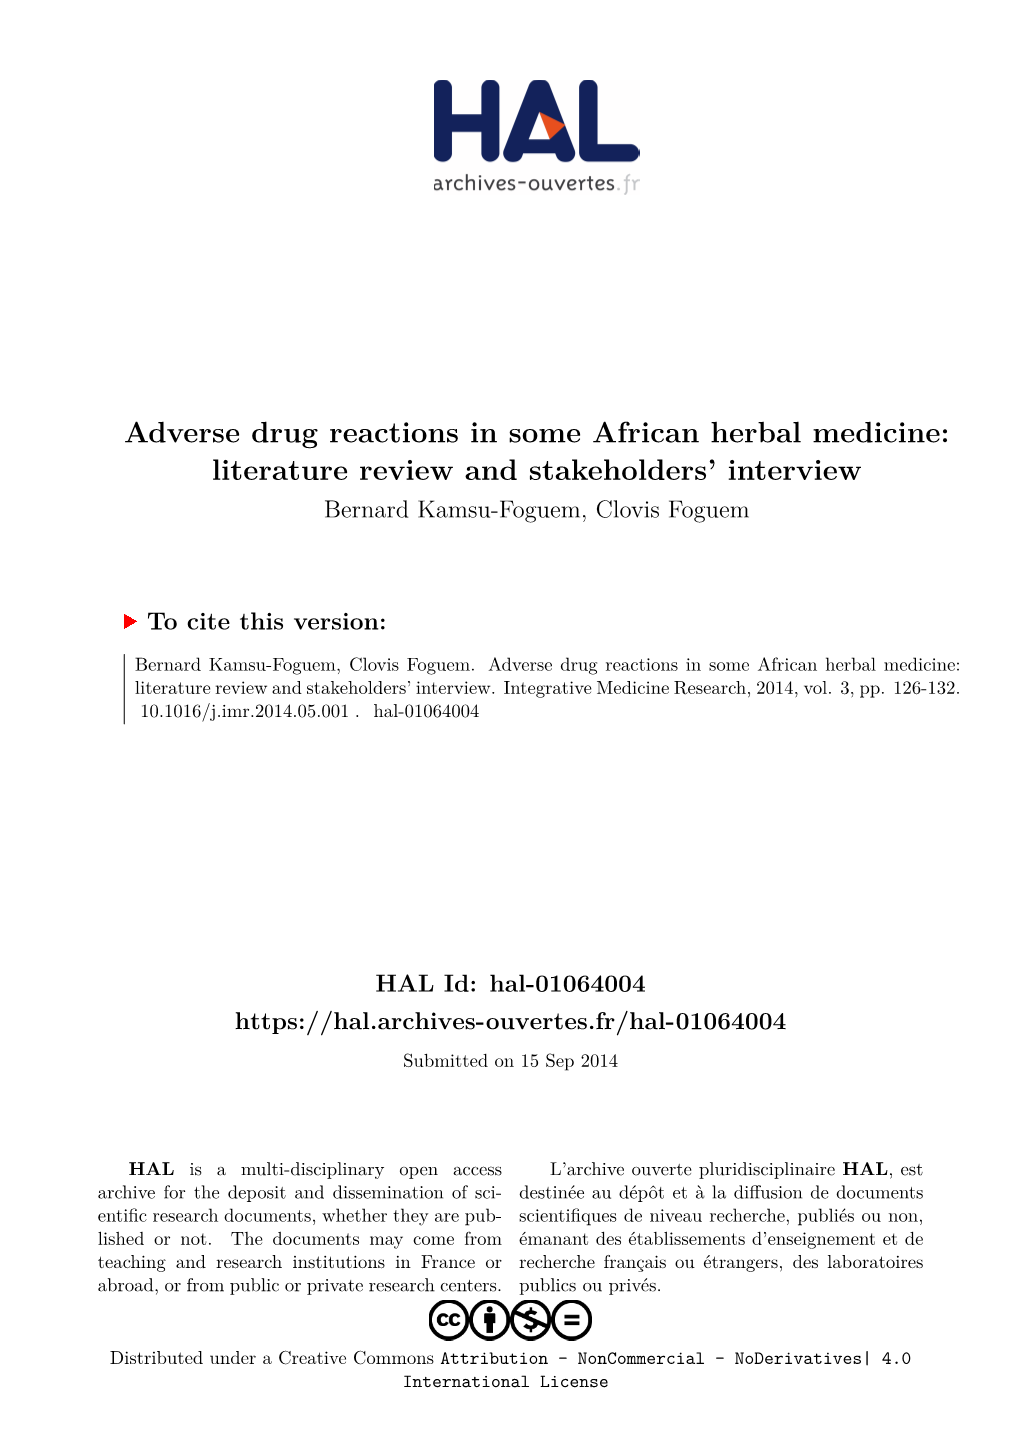 Adverse Drug Reactions in Some African Herbal Medicine: Literature Review and Stakeholders’ Interview Bernard Kamsu-Foguem, Clovis Foguem